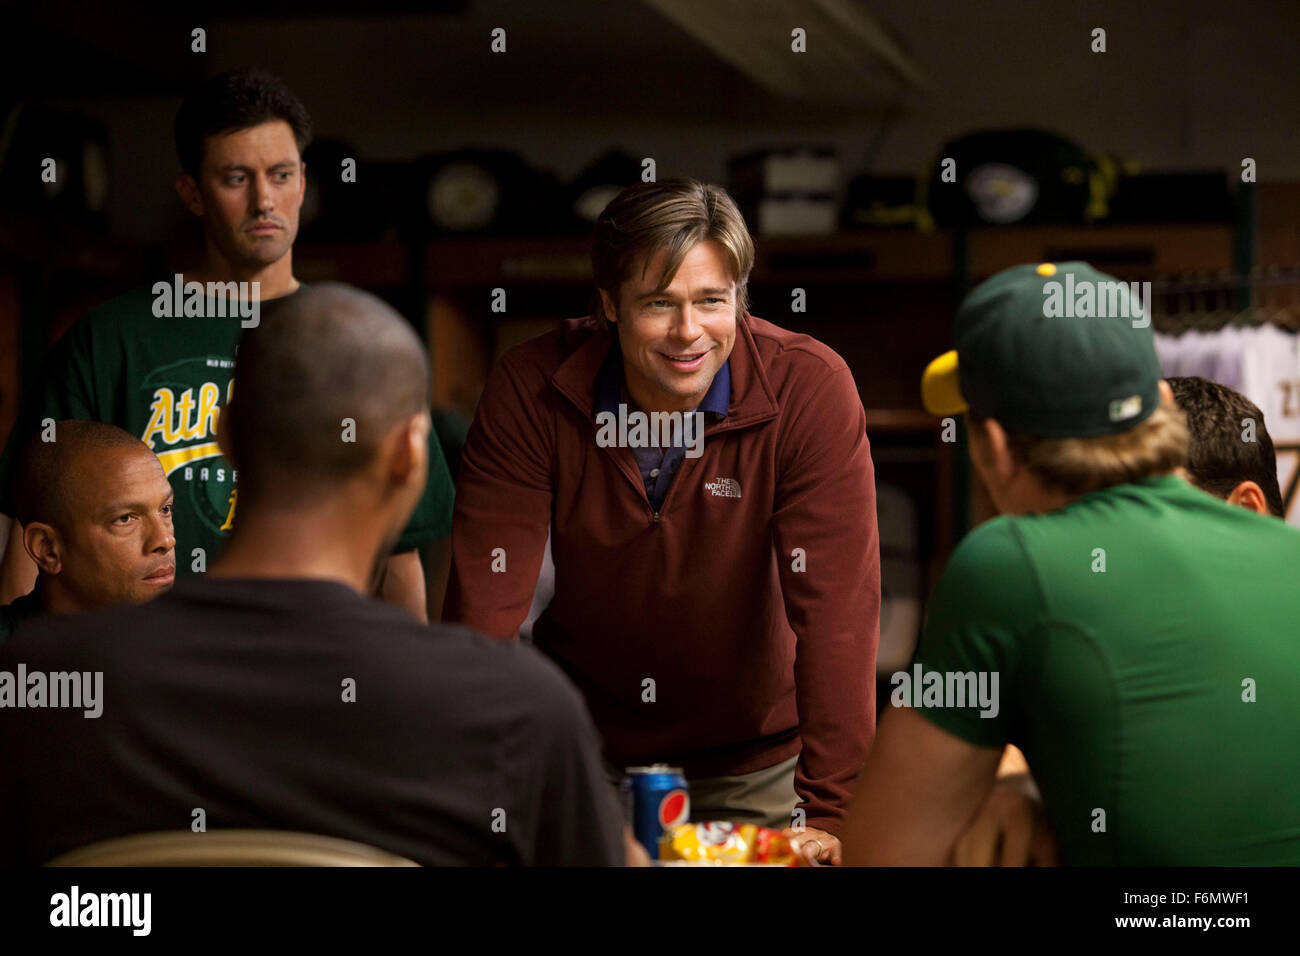 RELEASE DATE: September 23, 2011   TITLE: Moneyball   STUDIO: Columbia Pictures   DIRECTOR: Bennett Miller  PLOT: The story of Oakland A's general manager Billy Beane's successful attempt to put together a baseball club on a budget by employing computer-generated analysis to draft his players   PICTURED: BRAD PITT as Billy Beane   (Credit Image: c Columbia Pictures/Entertainment Pictures) Stock Photo